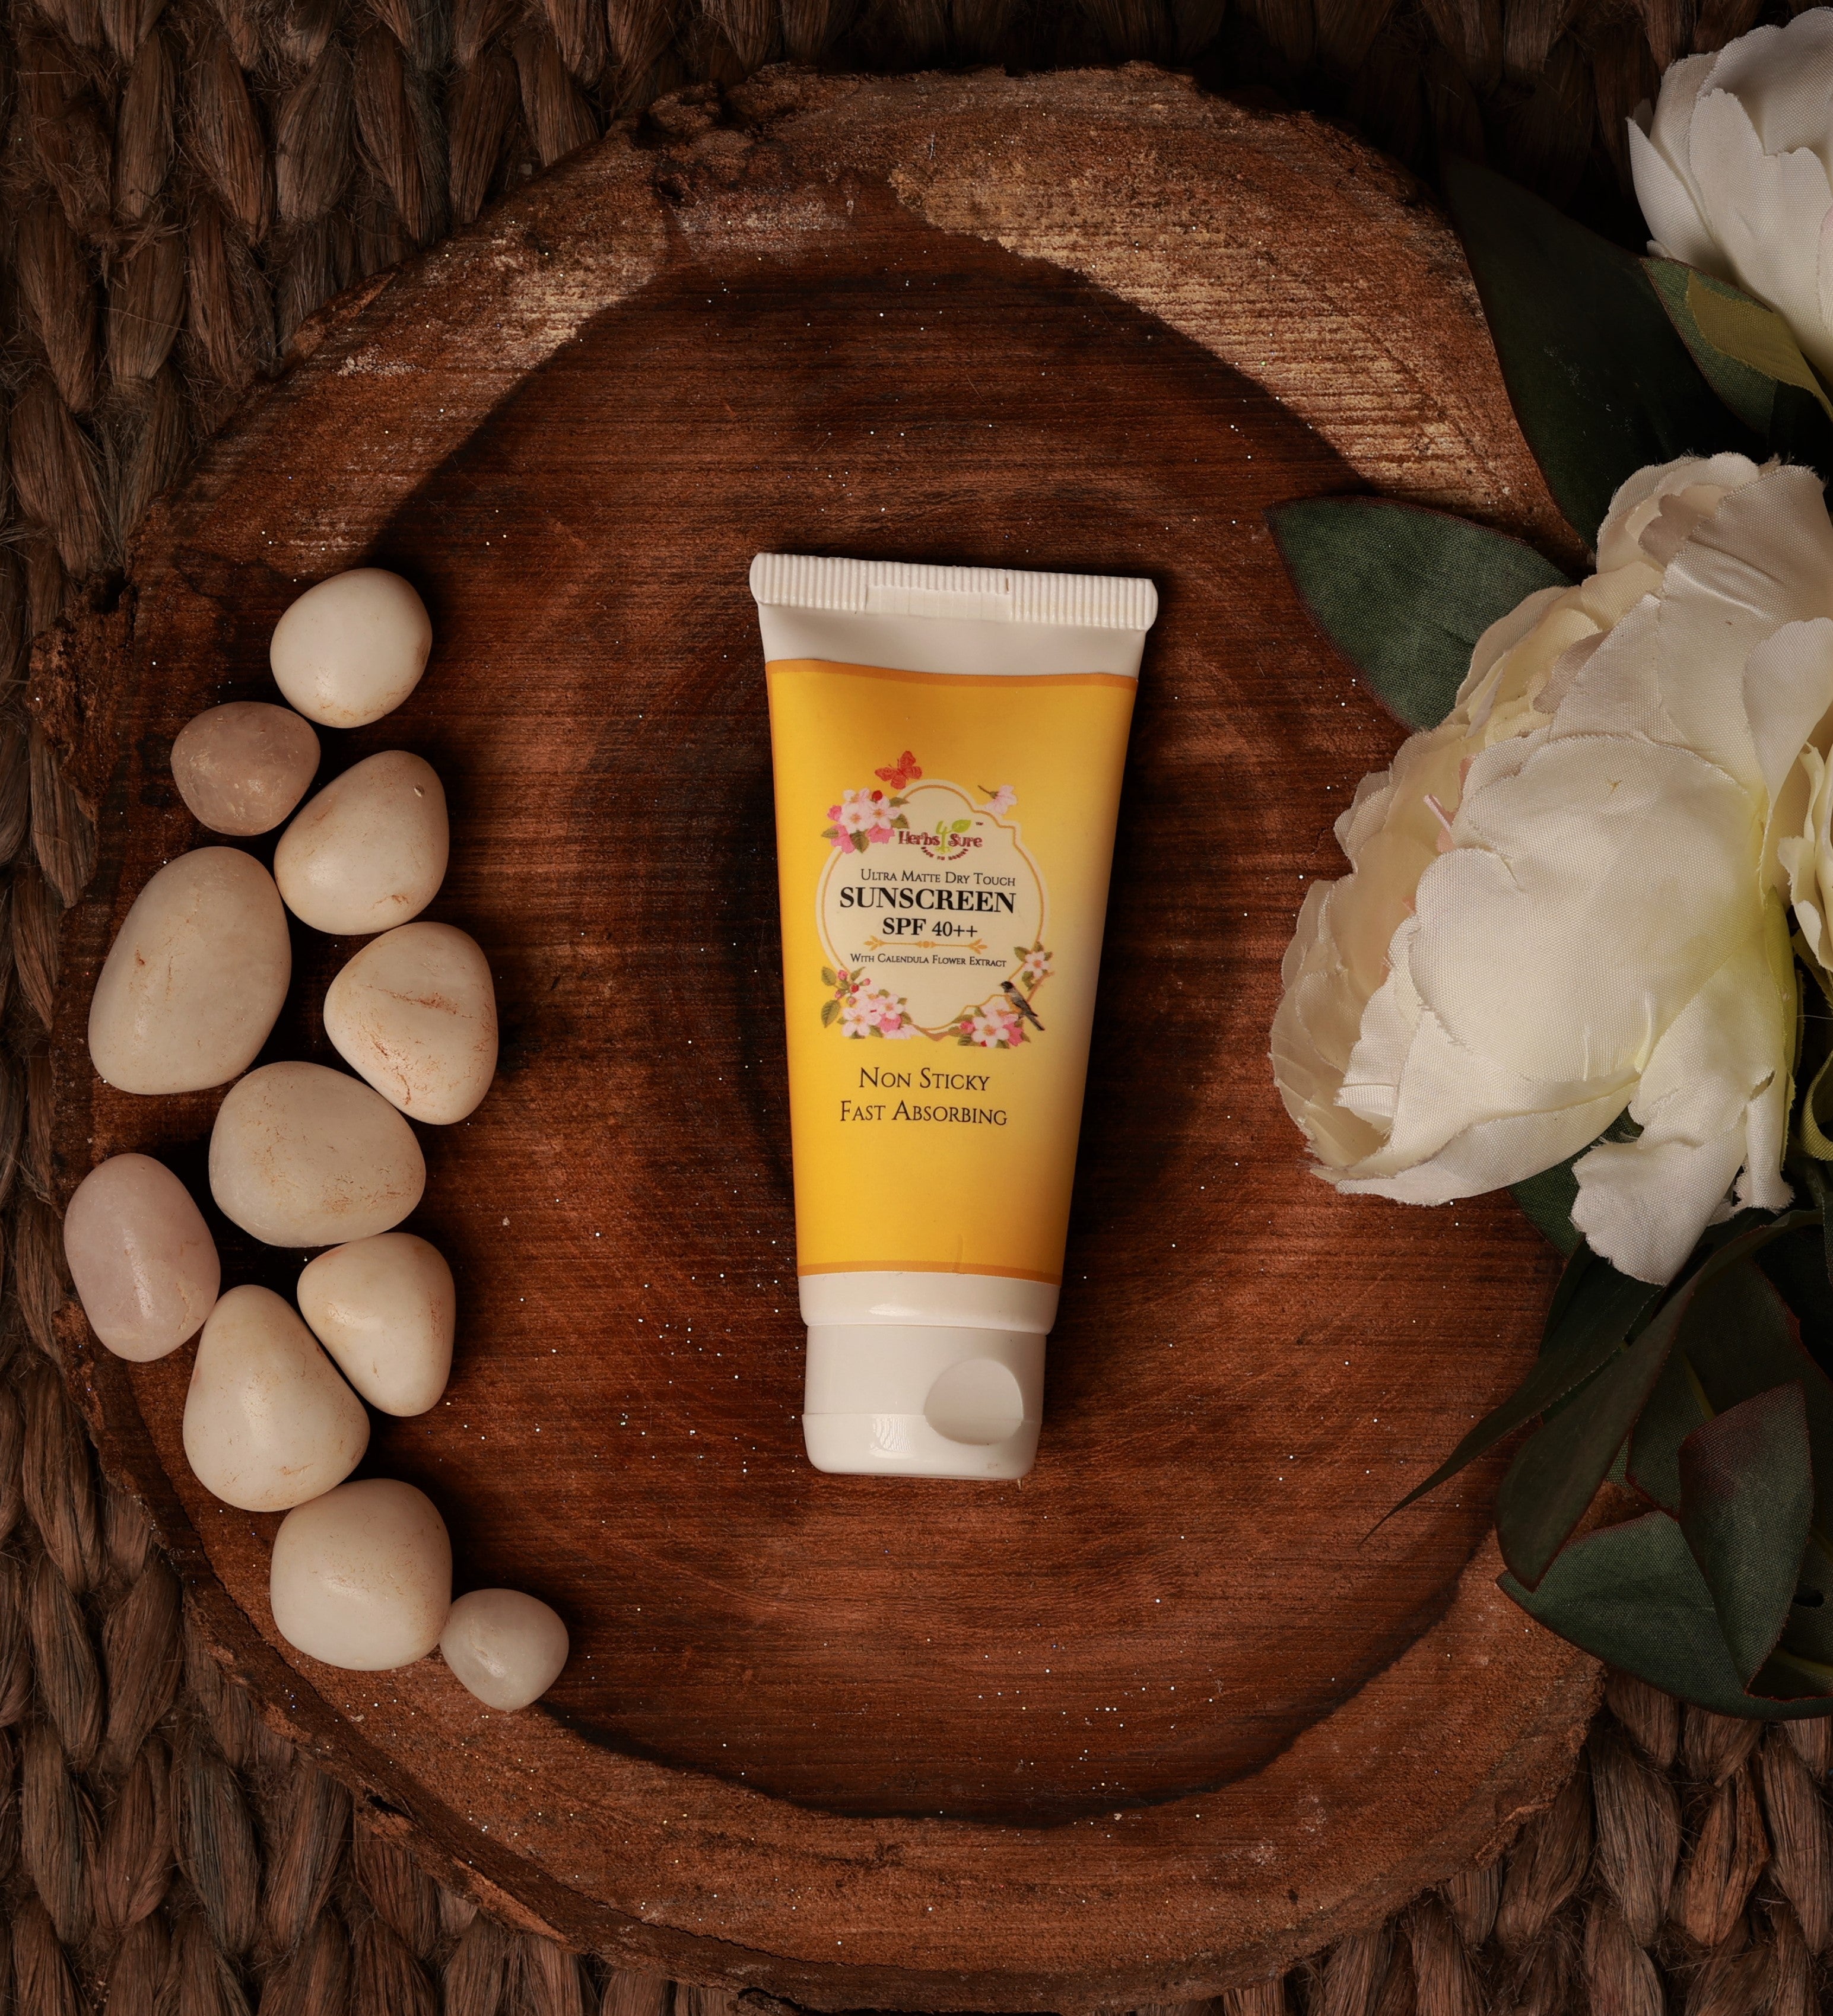 ULTRA MATTE DRY TOUCH SUNSCREEN SPF 40++ with Calendula flower extract